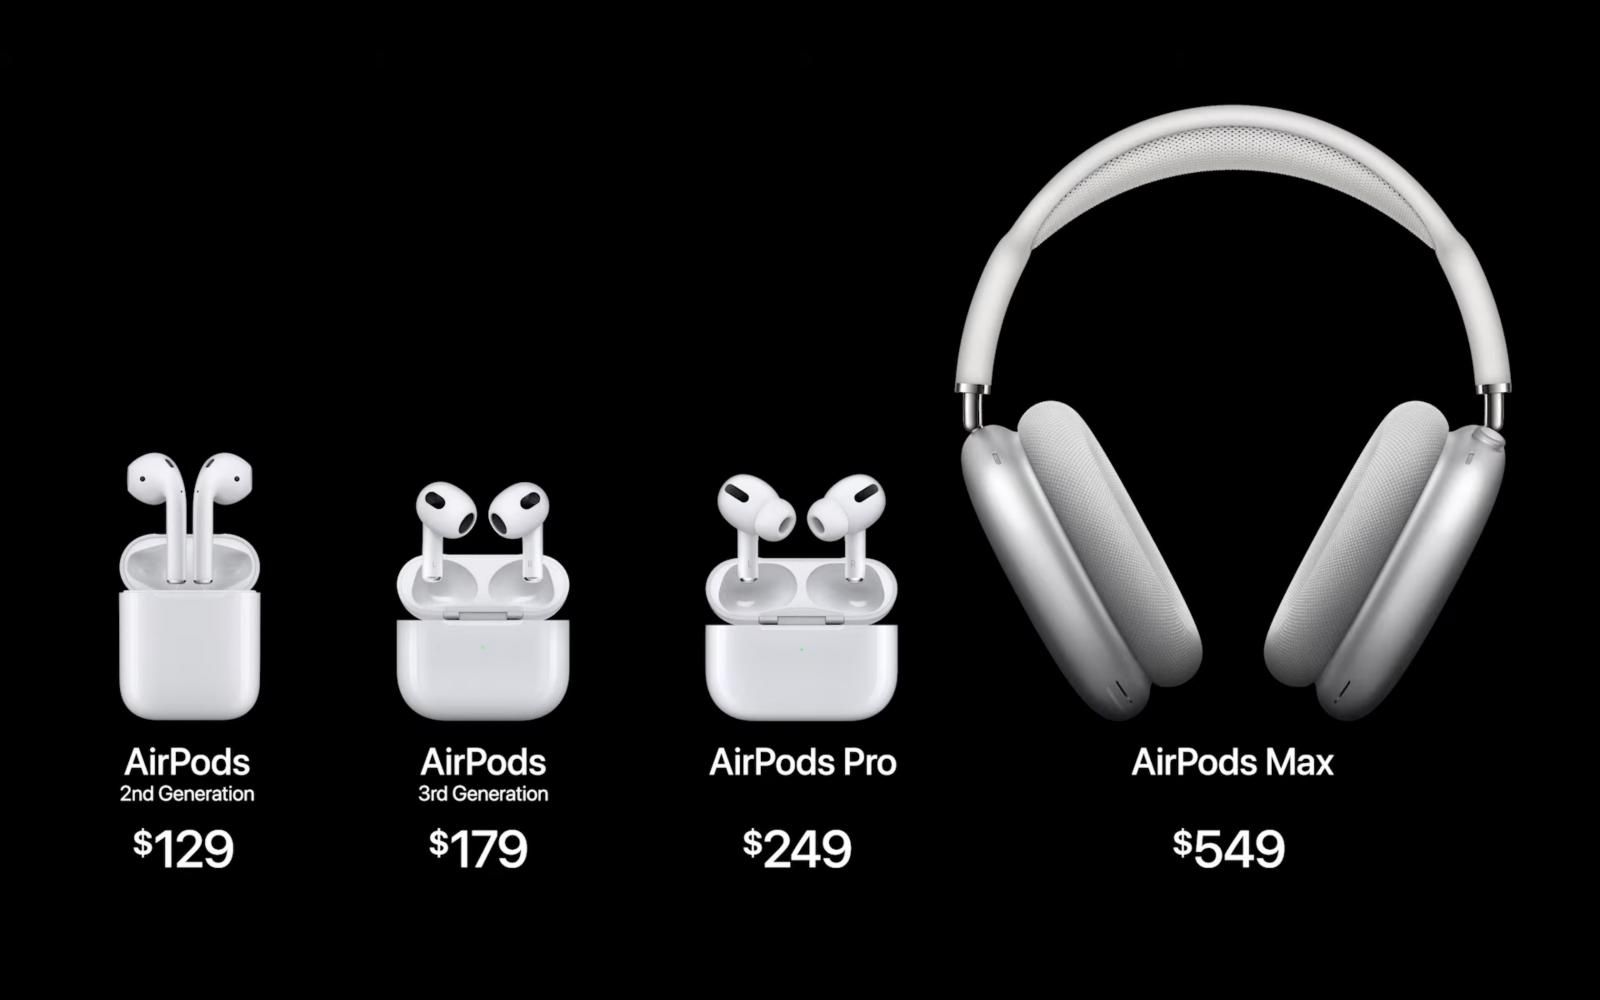 Apple AirPods 3rd Generation announced with new design and smarts